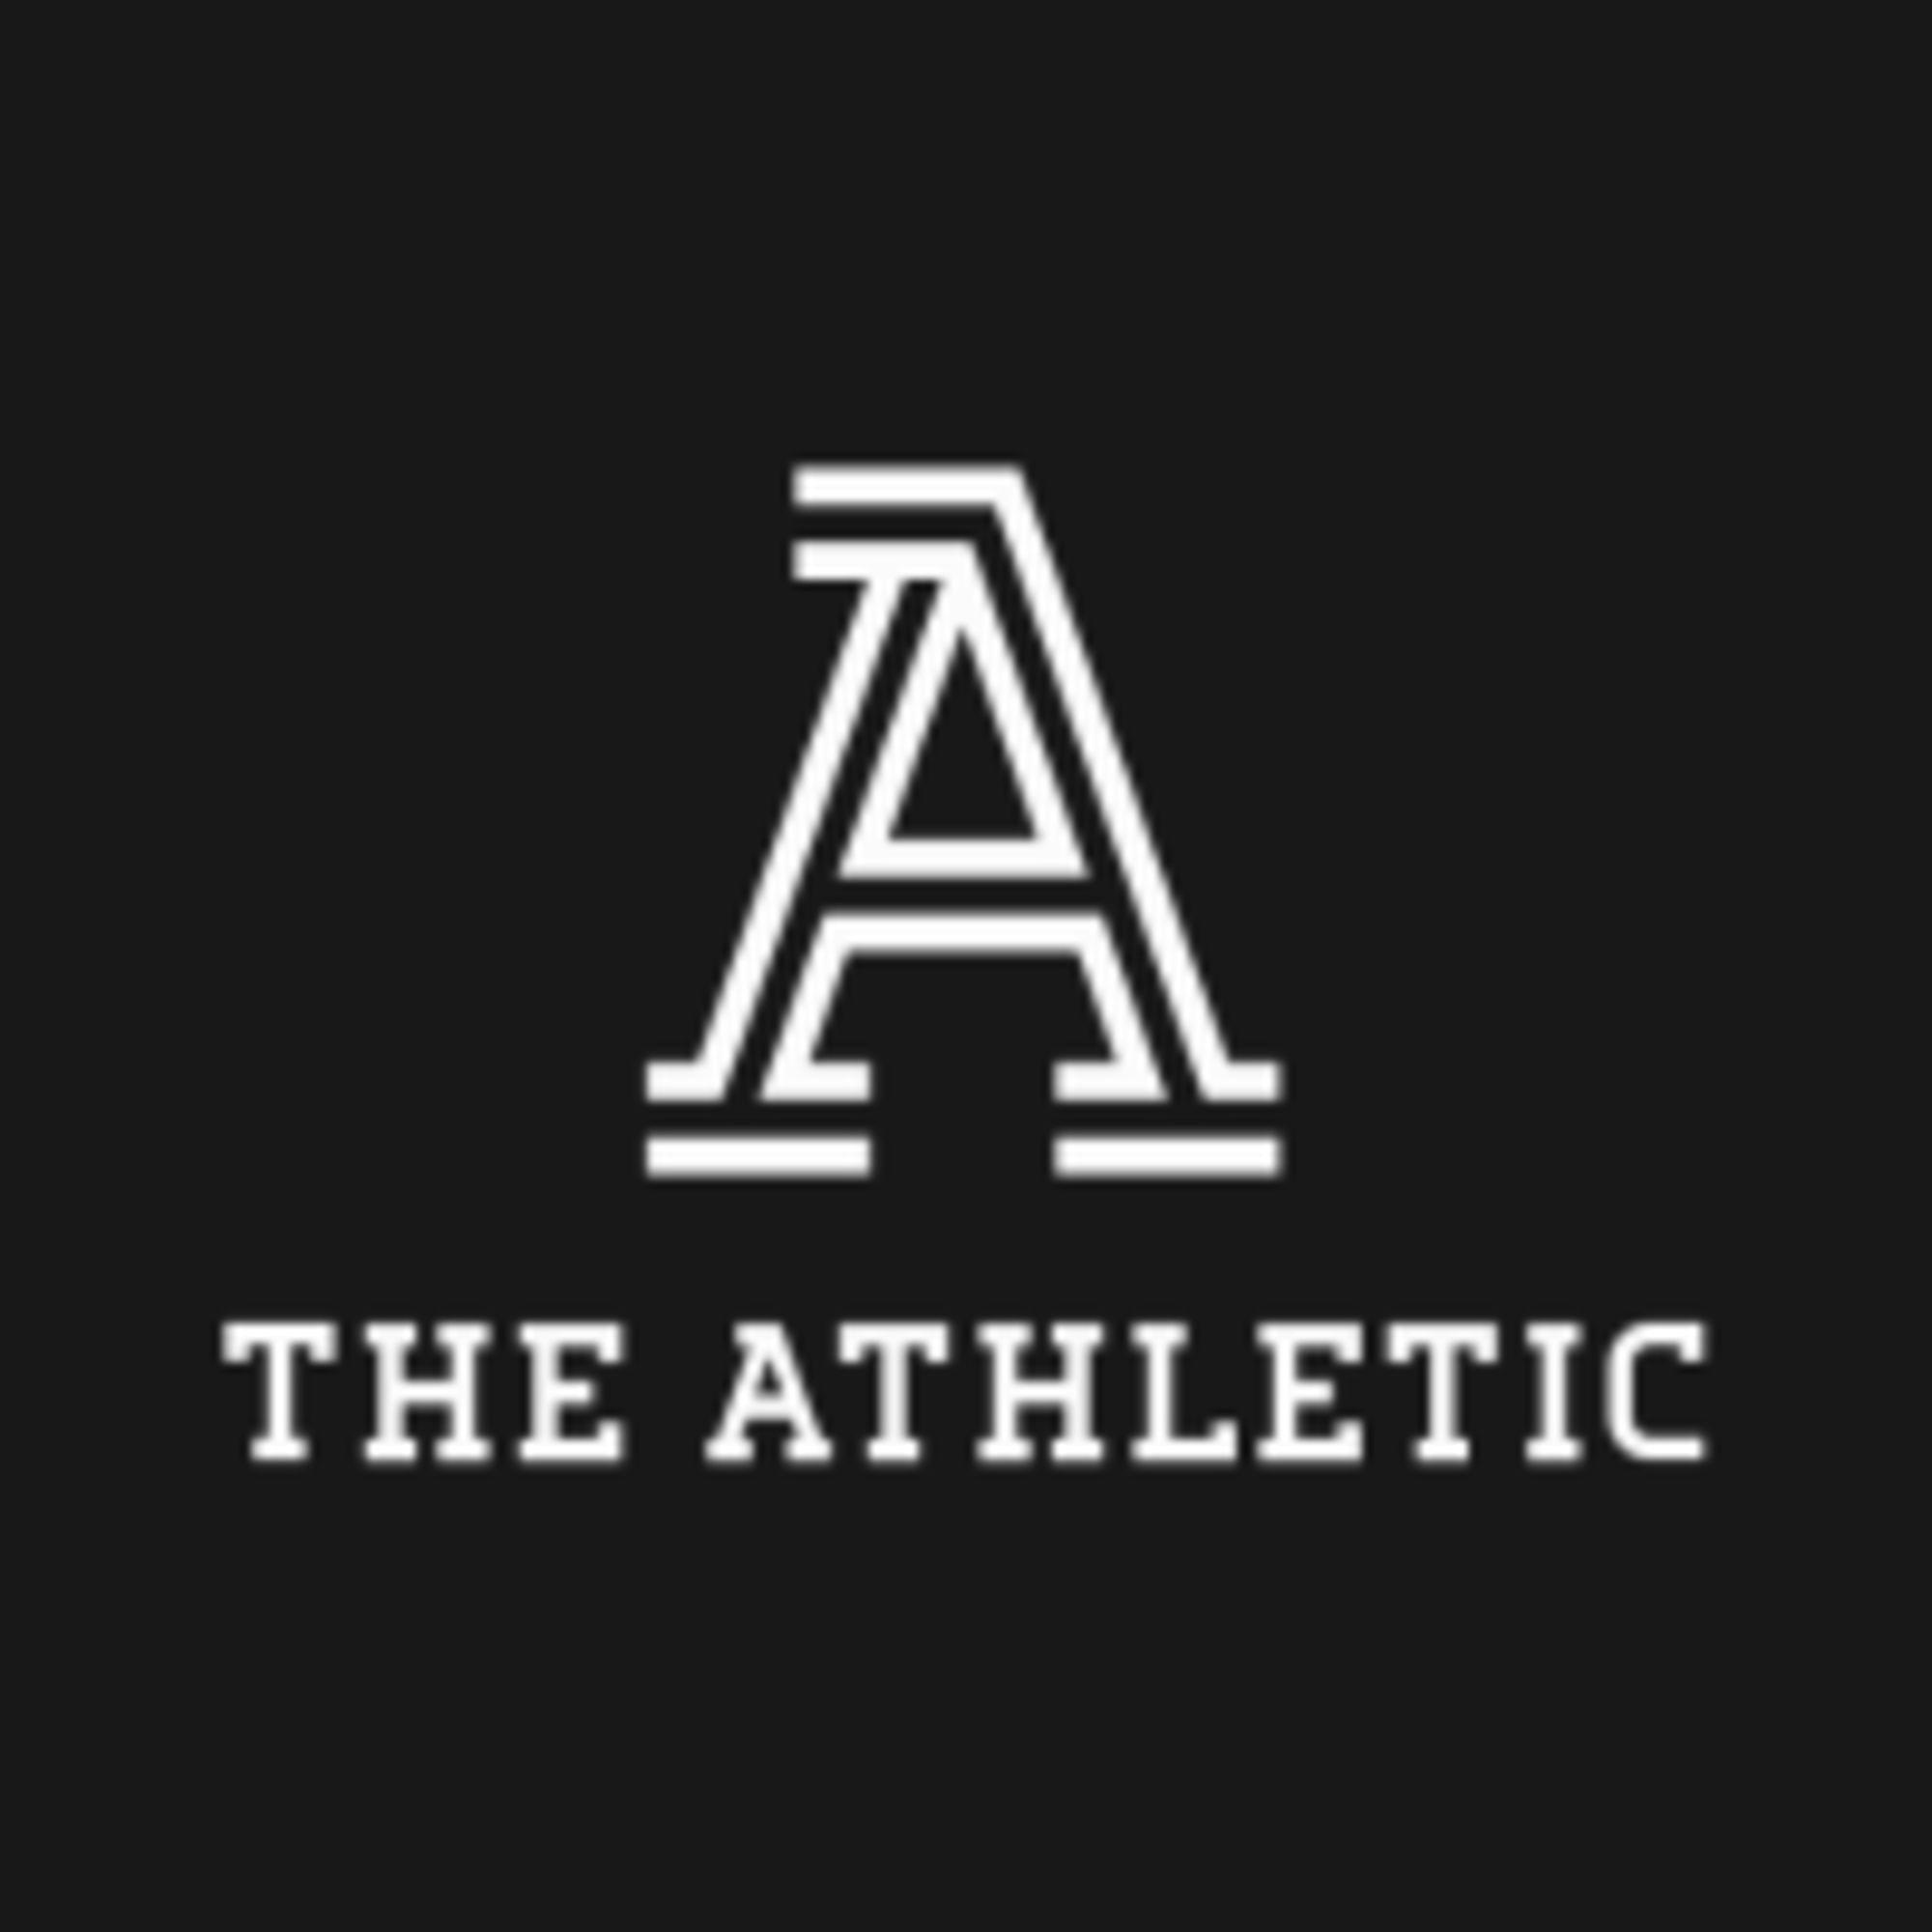 Slickdeals.net Logo - 1 year subscription to 'The Athletic' - $1.99 / mo $23.88 ...